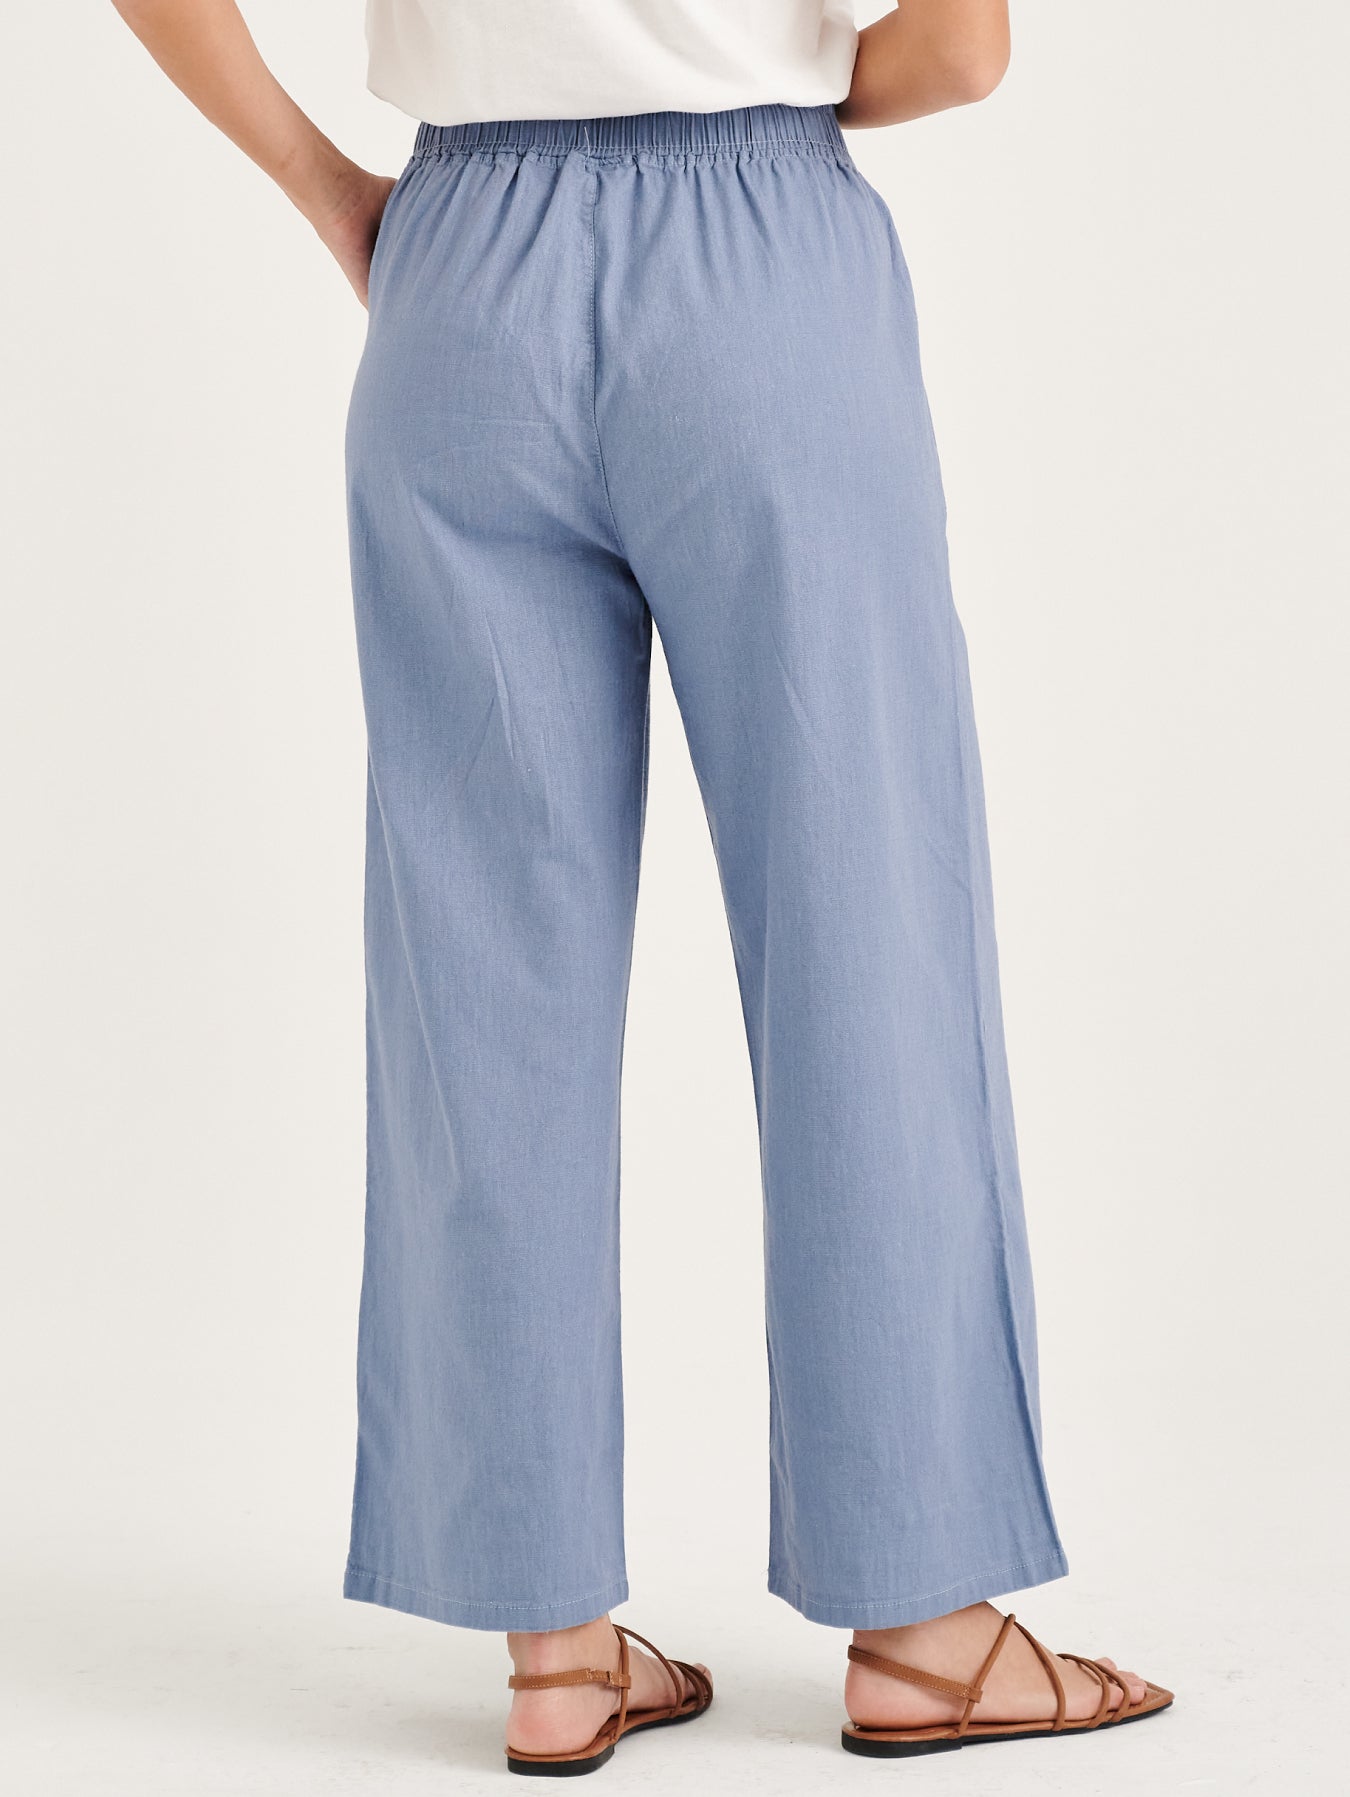 Classic and sophisticated light blue pants